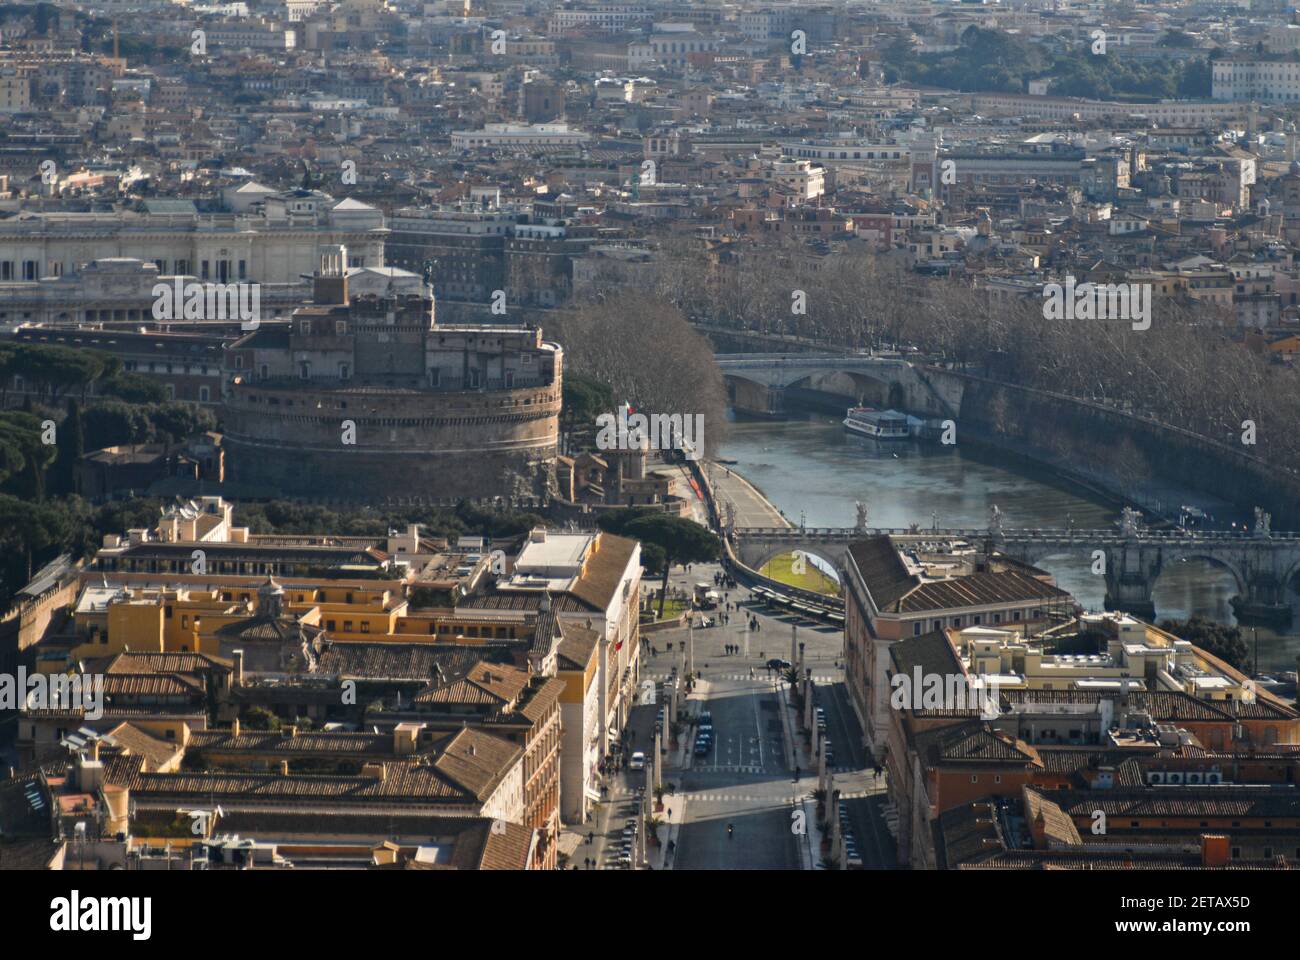 Castel Sant'Angelo, aerial view from Saint Peter's Basilica. Rome, Italy Stock Photo